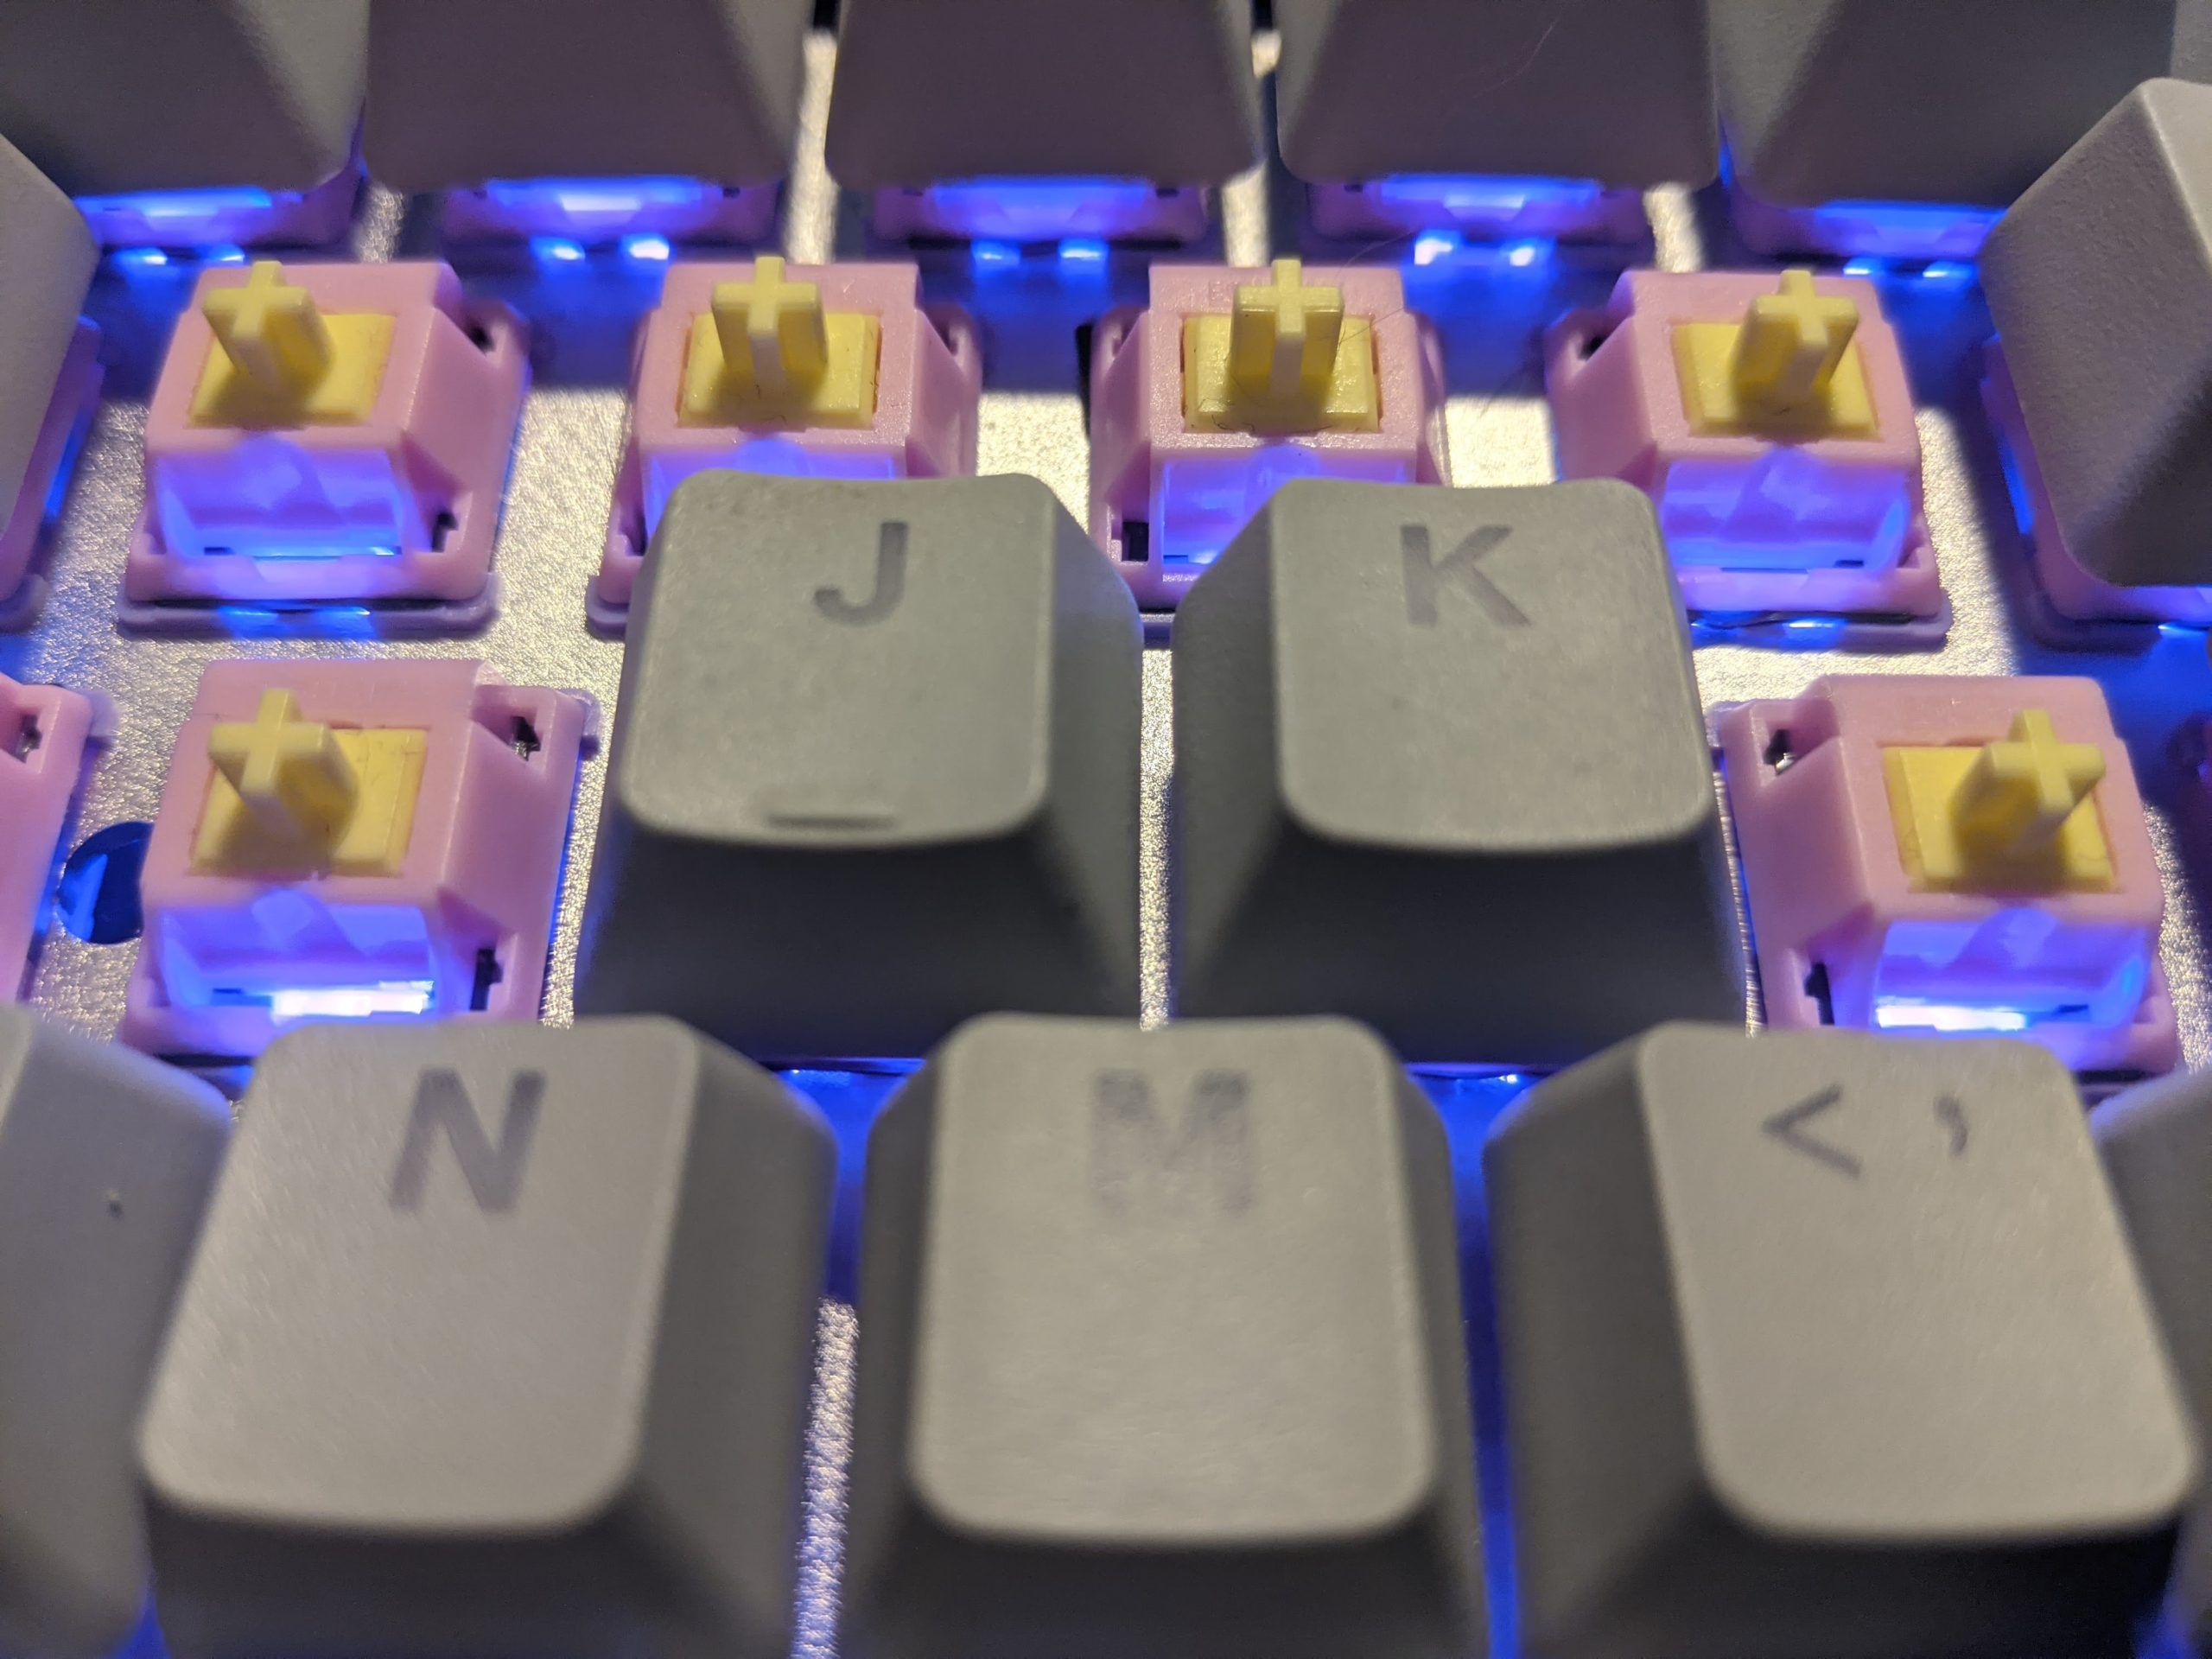 Keyboard with mech switches exposed